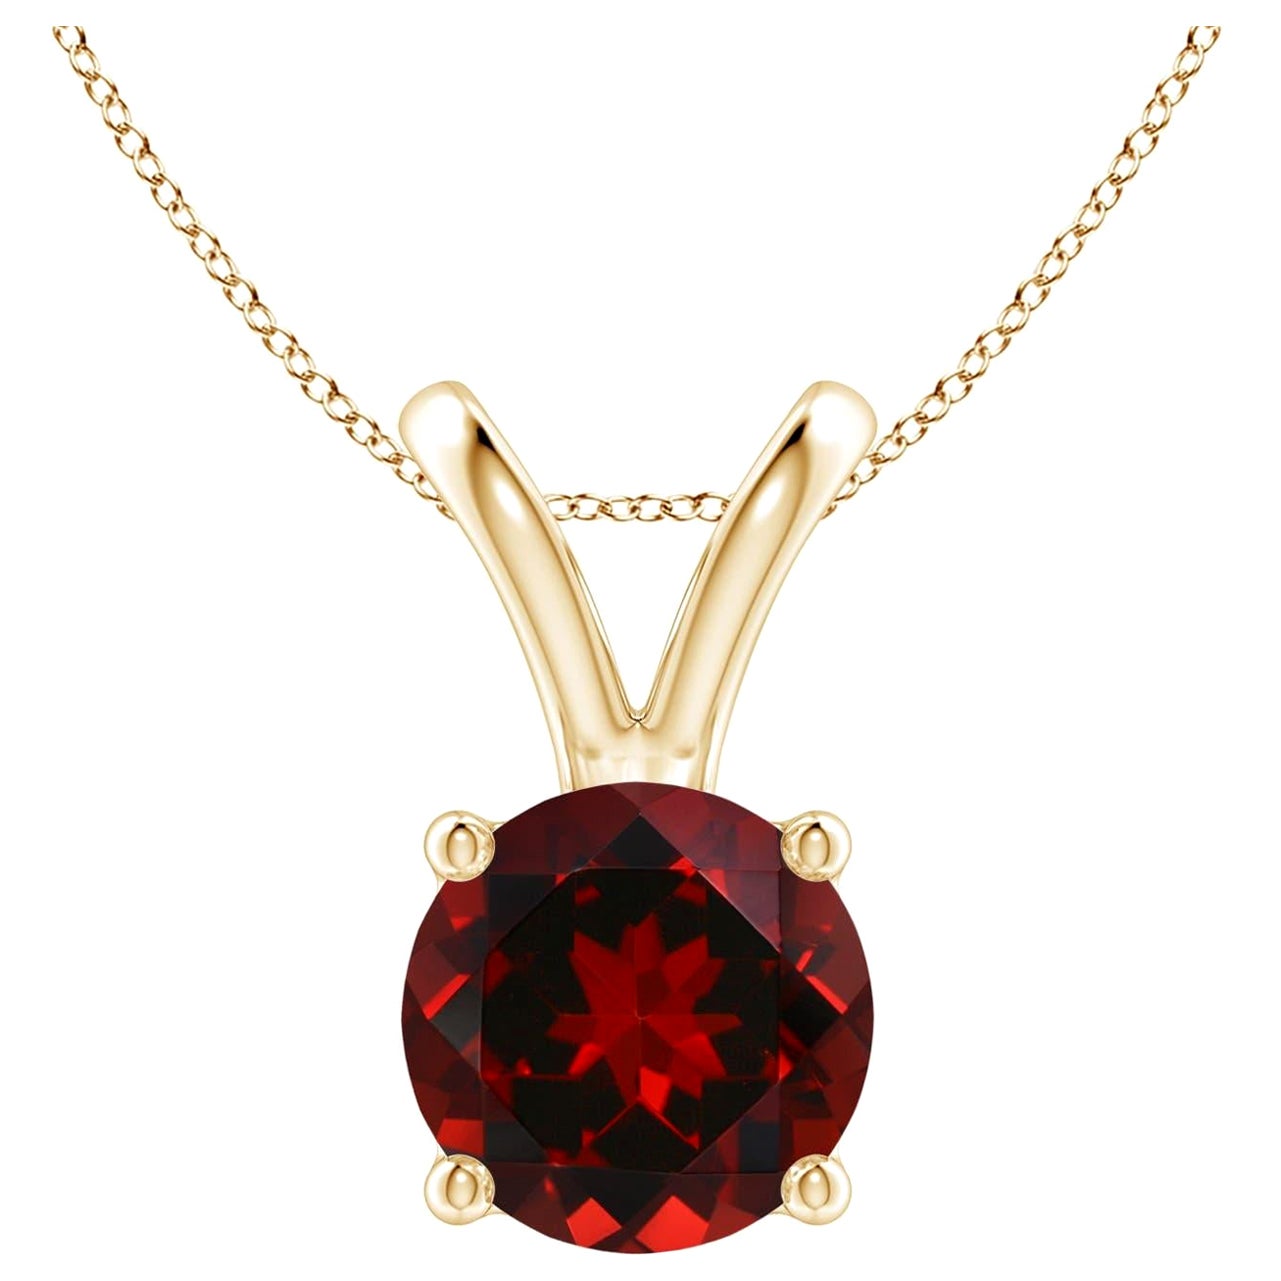 Natural V-Bale Round 2.2ct Garnet Solitaire Pendant in 14K Yellow Gold